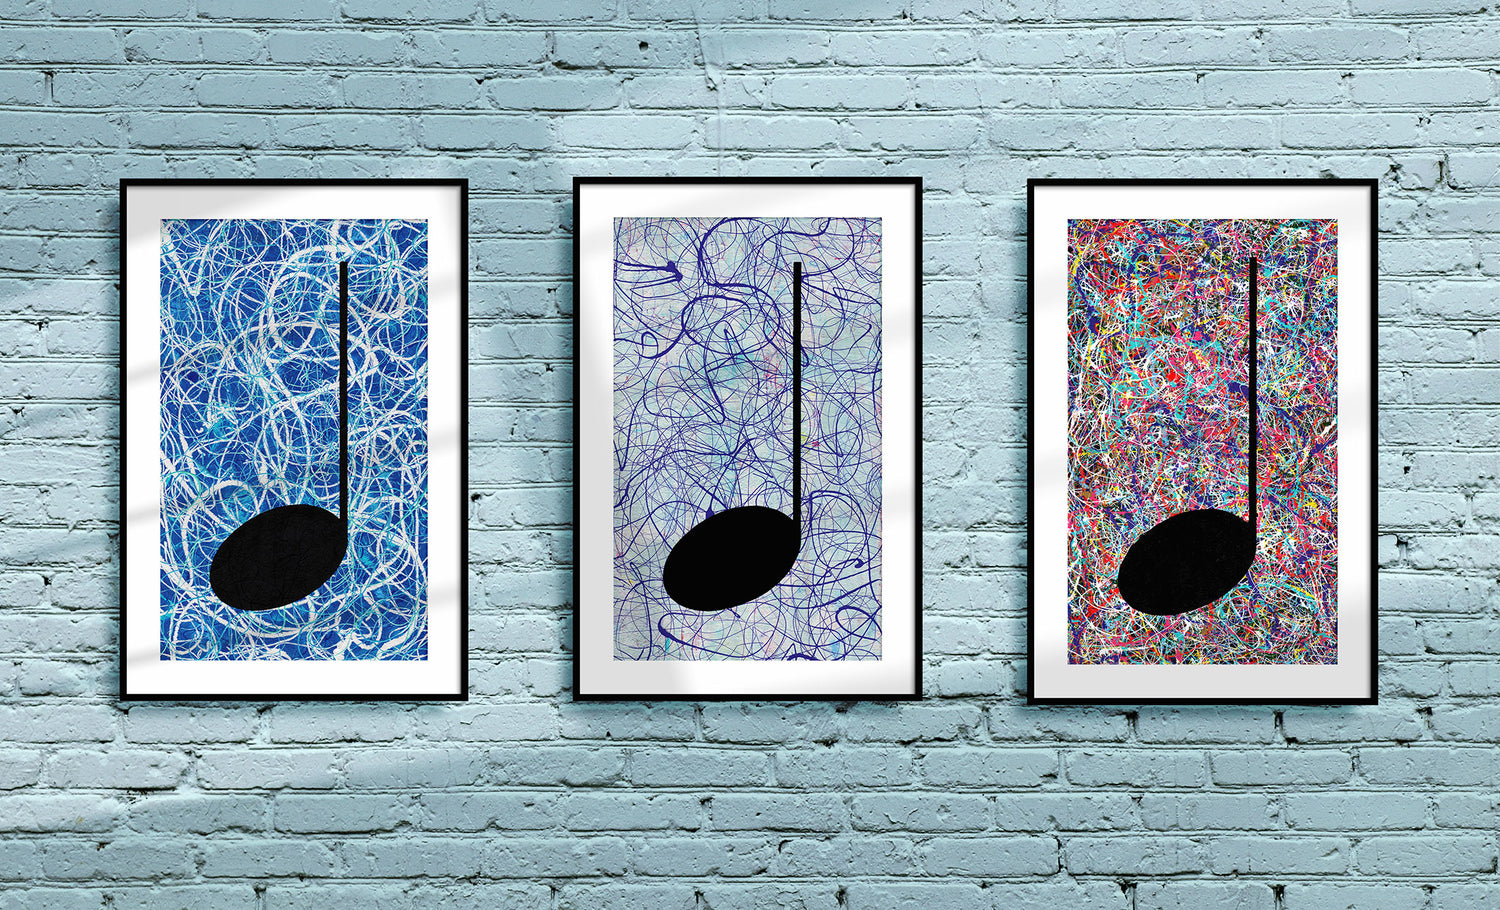 Three Music themed Art Prints, framed and hanging on a light blue industrial brick wall 